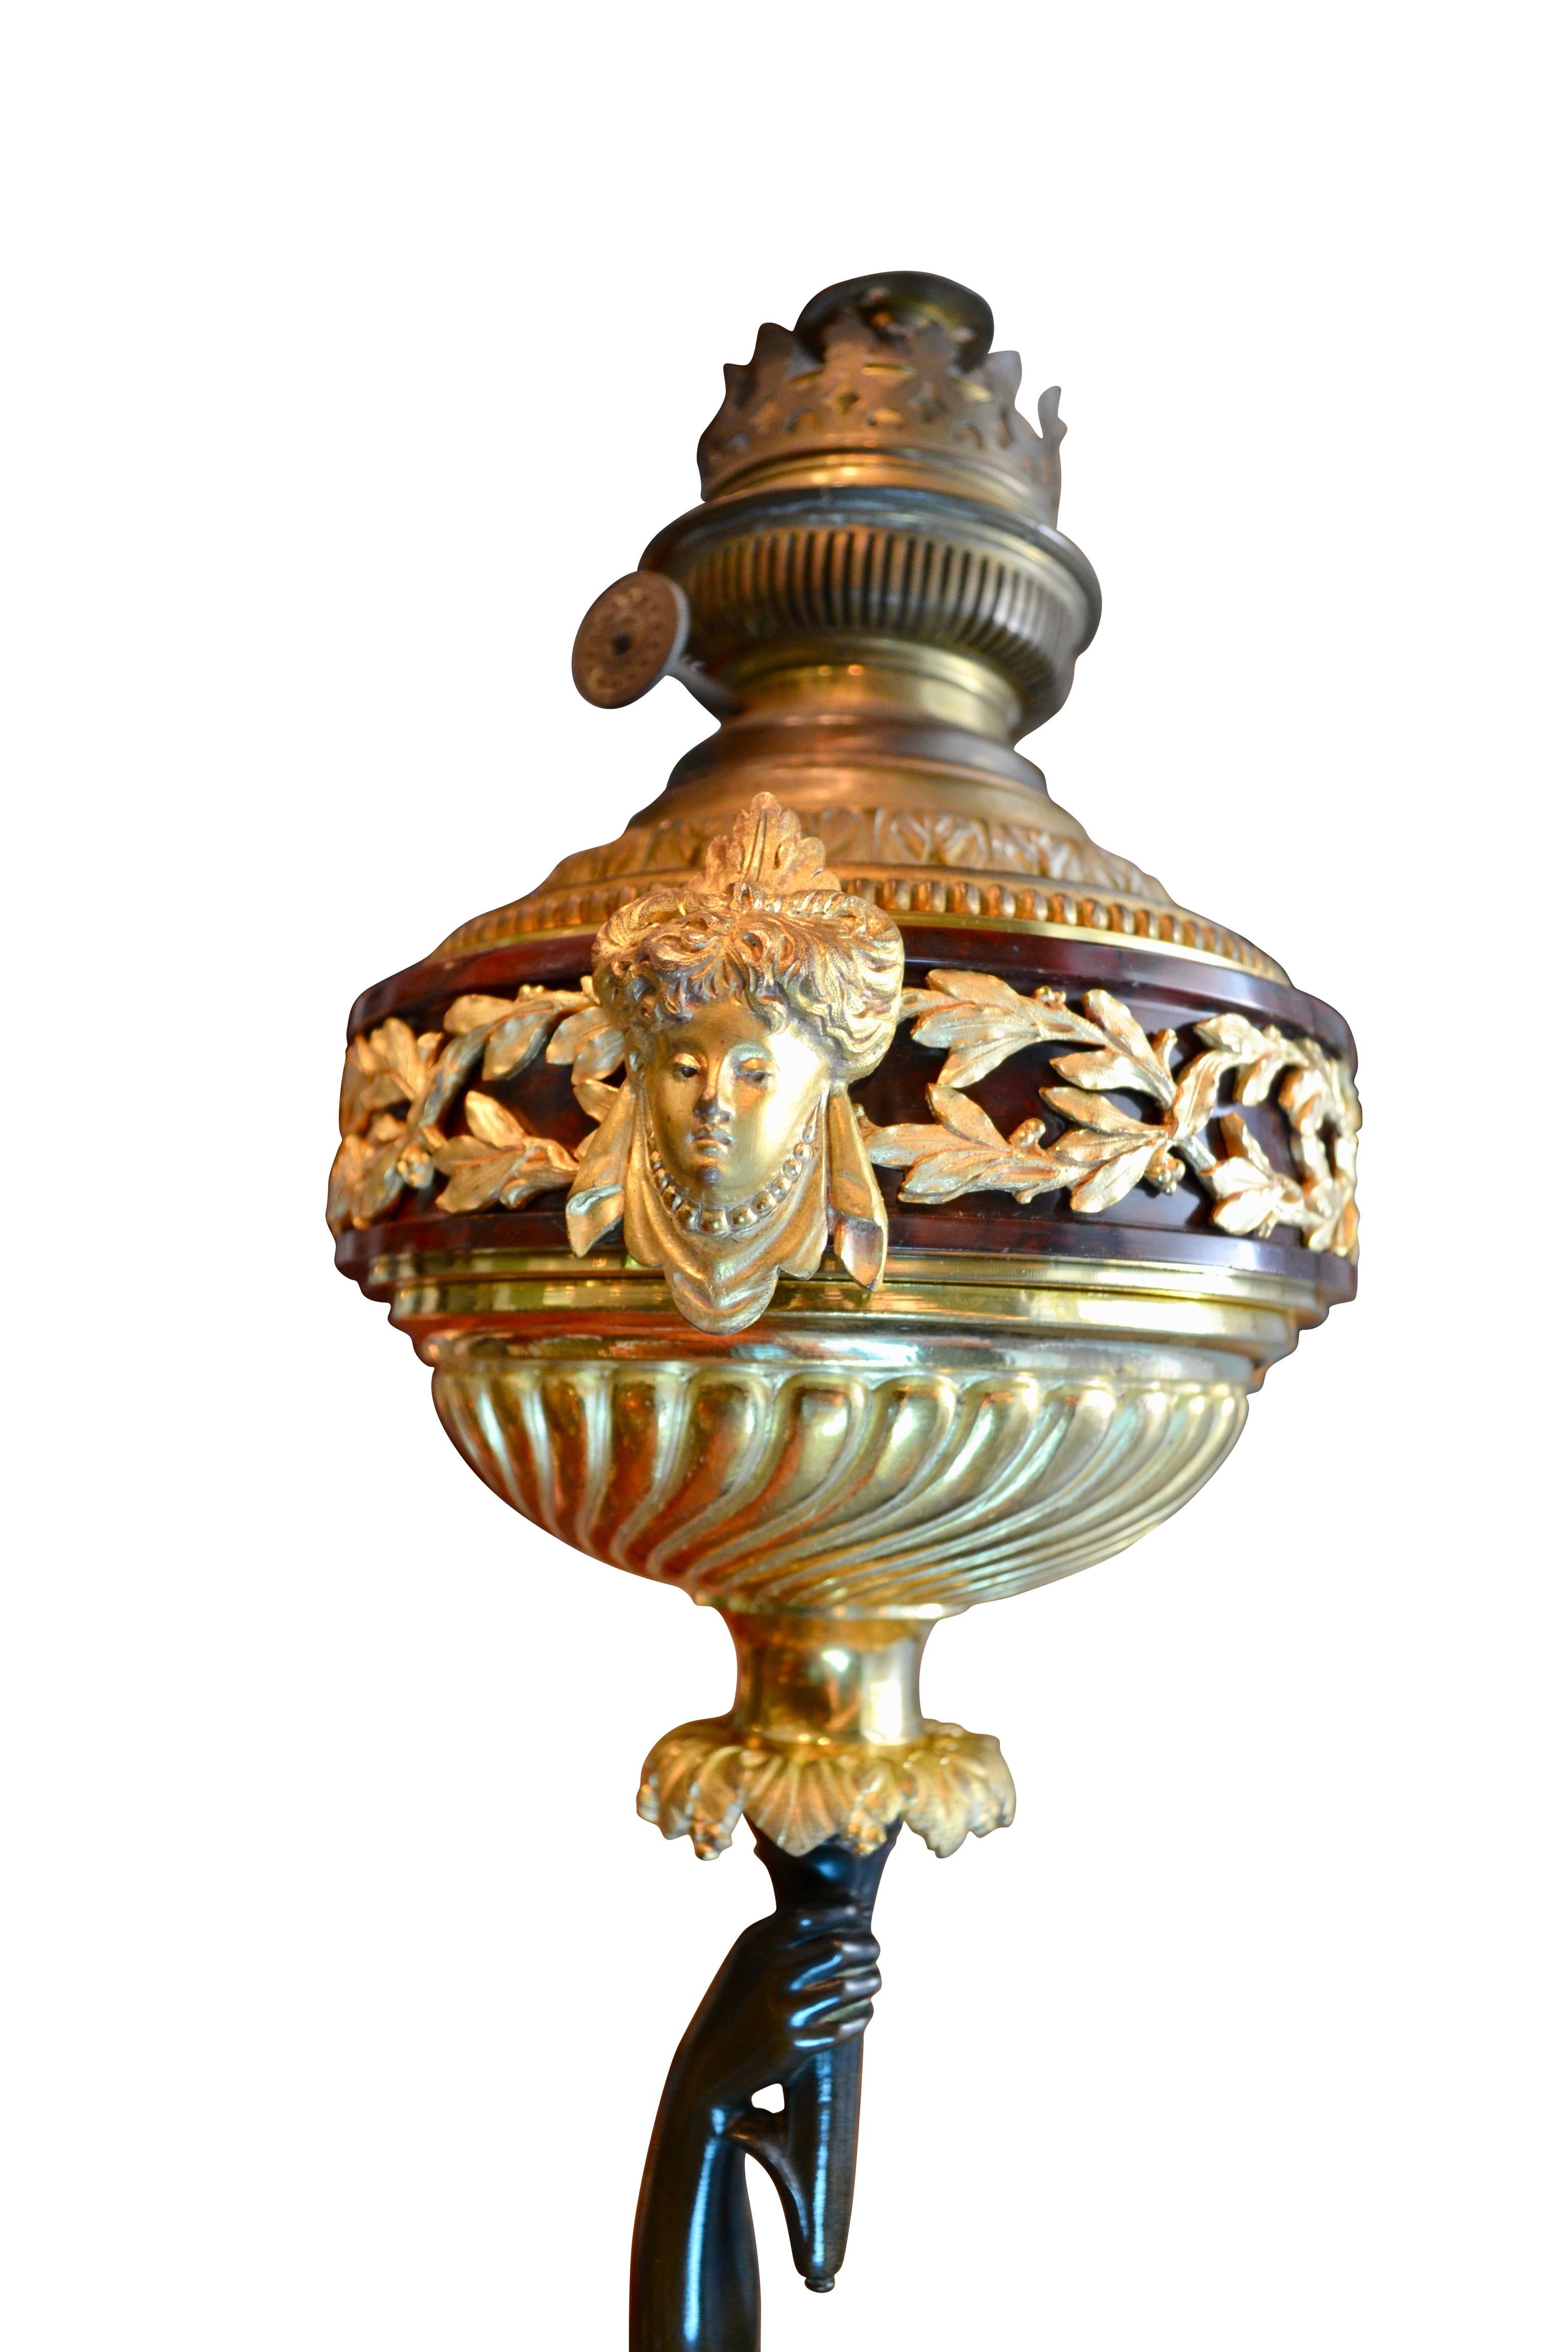  Oil Lamp Featuring a Mathurin Moreau Bronze Statue of  a Nymph and Putto   For Sale 2